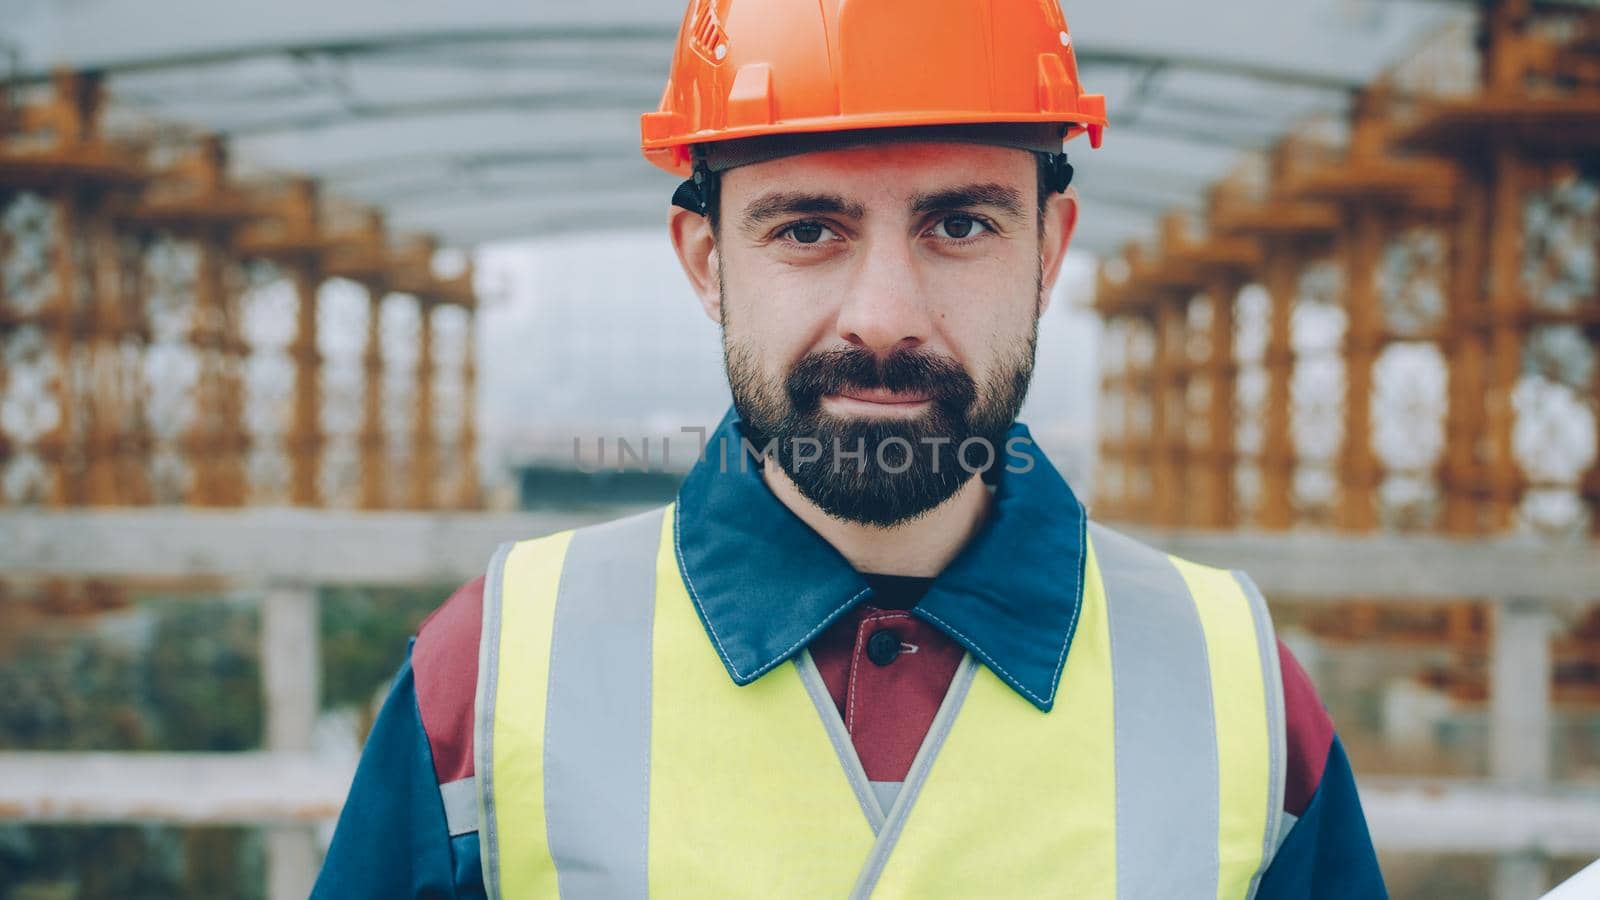 Portrait of confident construction workman wearing safety uniform standing in building area by silverkblack